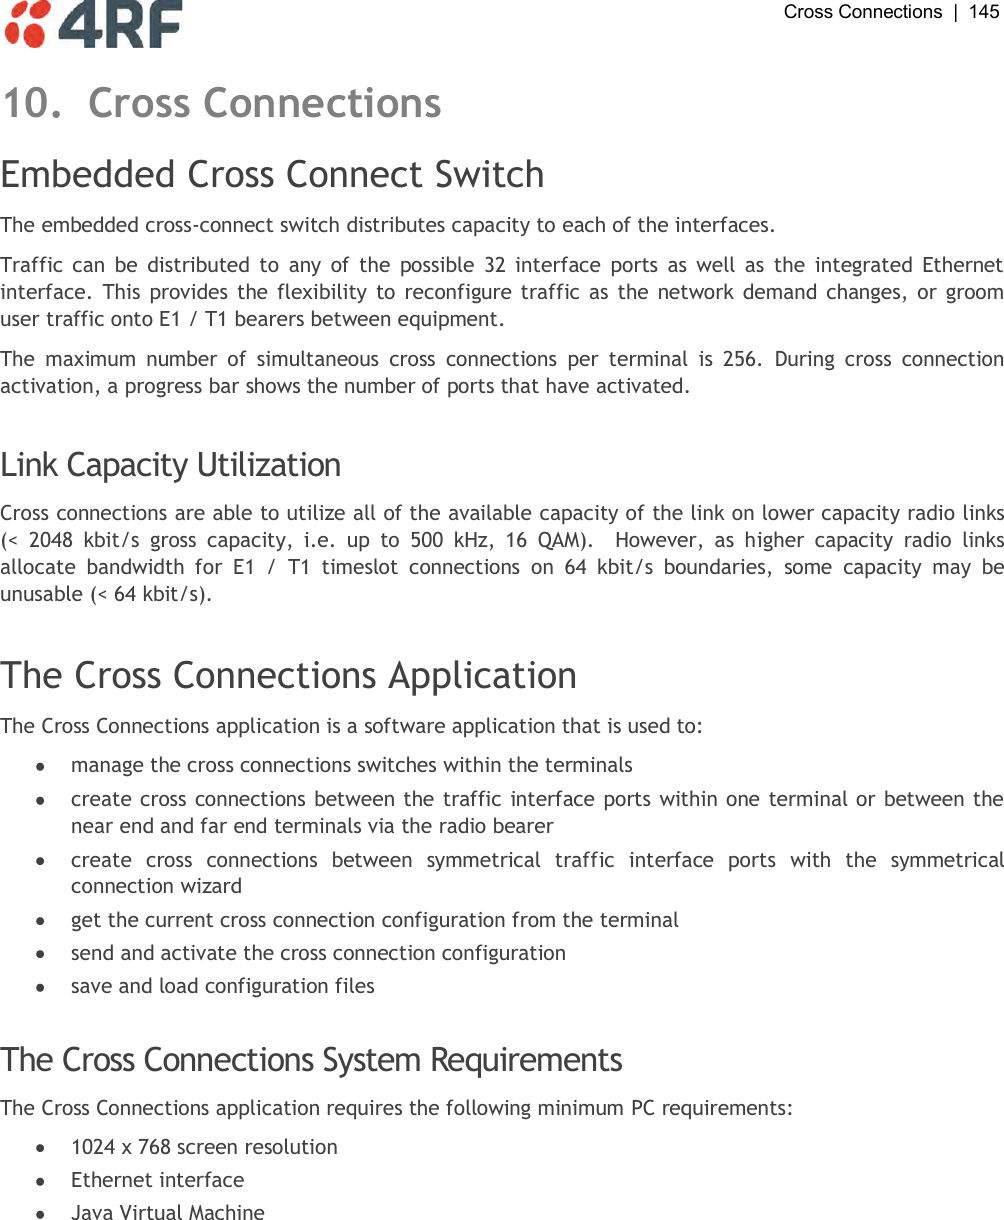  Cross Connections  |  145   10. Cross Connections Embedded Cross Connect Switch The embedded cross-connect switch distributes capacity to each of the interfaces. Traffic can  be  distributed  to  any of  the  possible  32  interface  ports  as  well as  the  integrated Ethernet interface. This  provides the flexibility to reconfigure traffic as the network demand changes, or groom user traffic onto E1 / T1 bearers between equipment. The  maximum  number  of  simultaneous  cross  connections  per  terminal  is  256.  During  cross  connection activation, a progress bar shows the number of ports that have activated.  Link Capacity Utilization Cross connections are able to utilize all of the available capacity of the link on lower capacity radio links (&lt;  2048  kbit/s  gross  capacity,  i.e.  up  to  500  kHz,  16  QAM).    However,  as  higher  capacity  radio  links allocate  bandwidth  for  E1  /  T1  timeslot  connections  on  64  kbit/s  boundaries,  some  capacity  may  be unusable (&lt; 64 kbit/s).  The Cross Connections Application The Cross Connections application is a software application that is used to:  manage the cross connections switches within the terminals  create cross connections between the traffic interface ports within one terminal or between the near end and far end terminals via the radio bearer  create  cross  connections  between  symmetrical  traffic  interface  ports  with  the  symmetrical connection wizard  get the current cross connection configuration from the terminal  send and activate the cross connection configuration  save and load configuration files  The Cross Connections System Requirements The Cross Connections application requires the following minimum PC requirements:  1024 x 768 screen resolution  Ethernet interface  Java Virtual Machine  